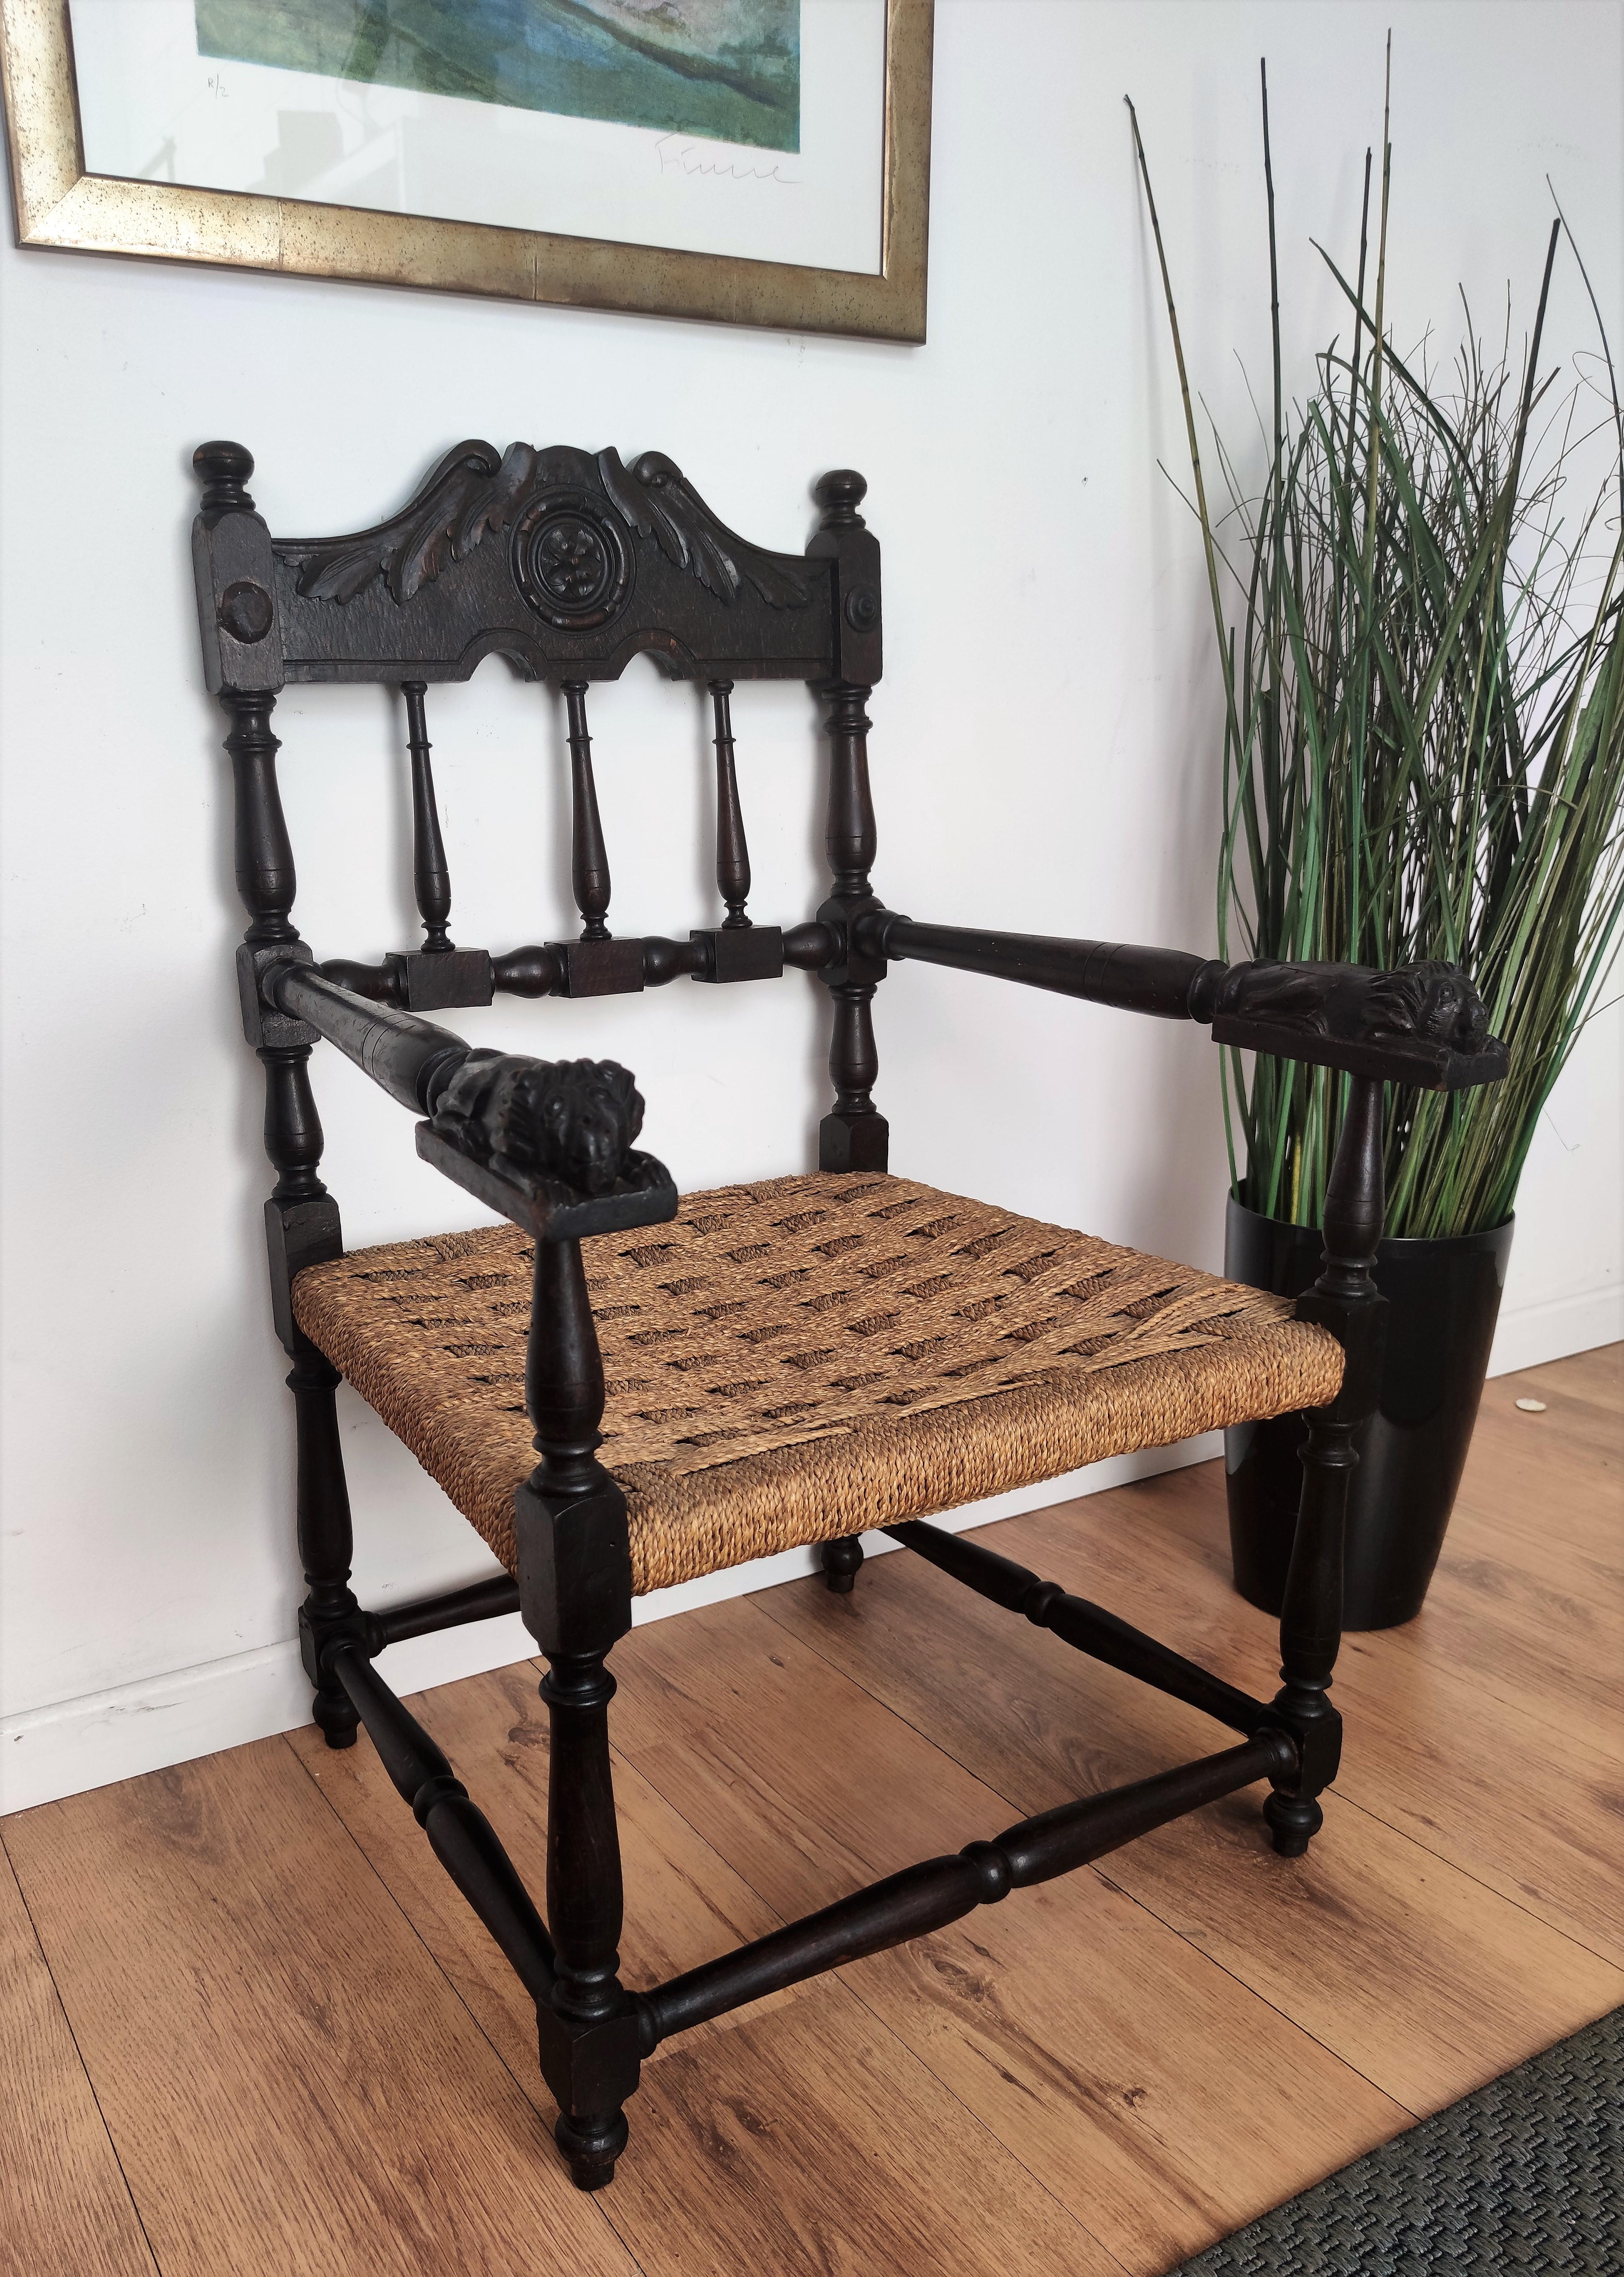 Stylish 1960s Mid-Century Modern armchair throne in wood and cord or woven rope, in the style of Audoux Minet with carved decorated back. The traditional and classical design and shape of the wooden structure, typical of Mid-Century Modern style,